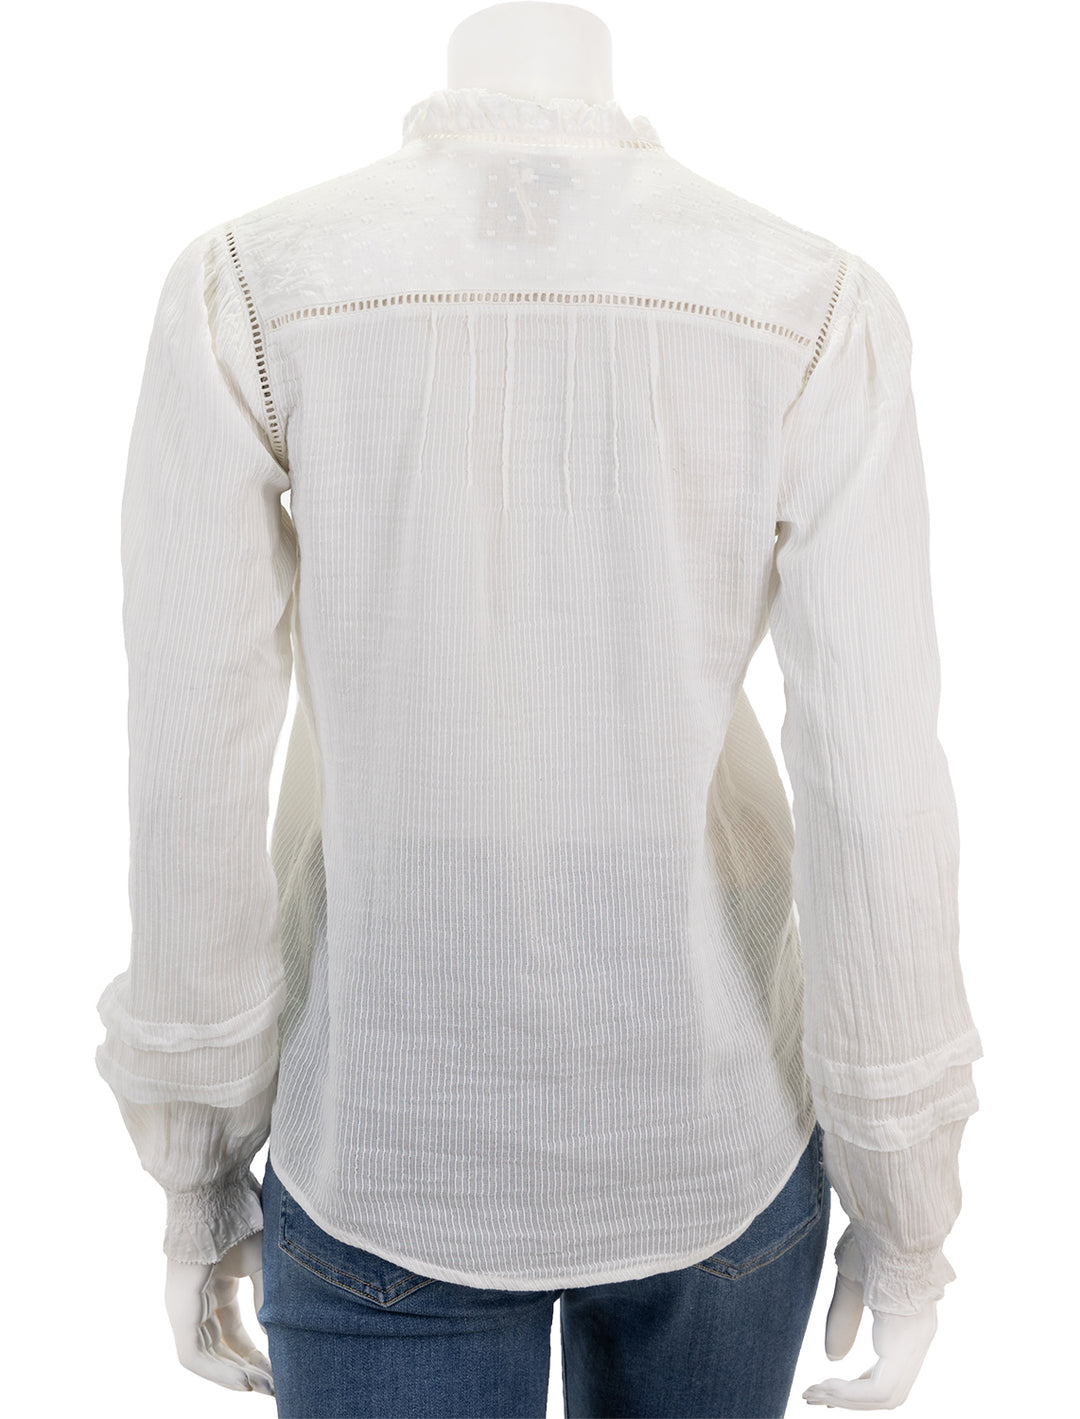 Back view of Faherty's willa top in white.